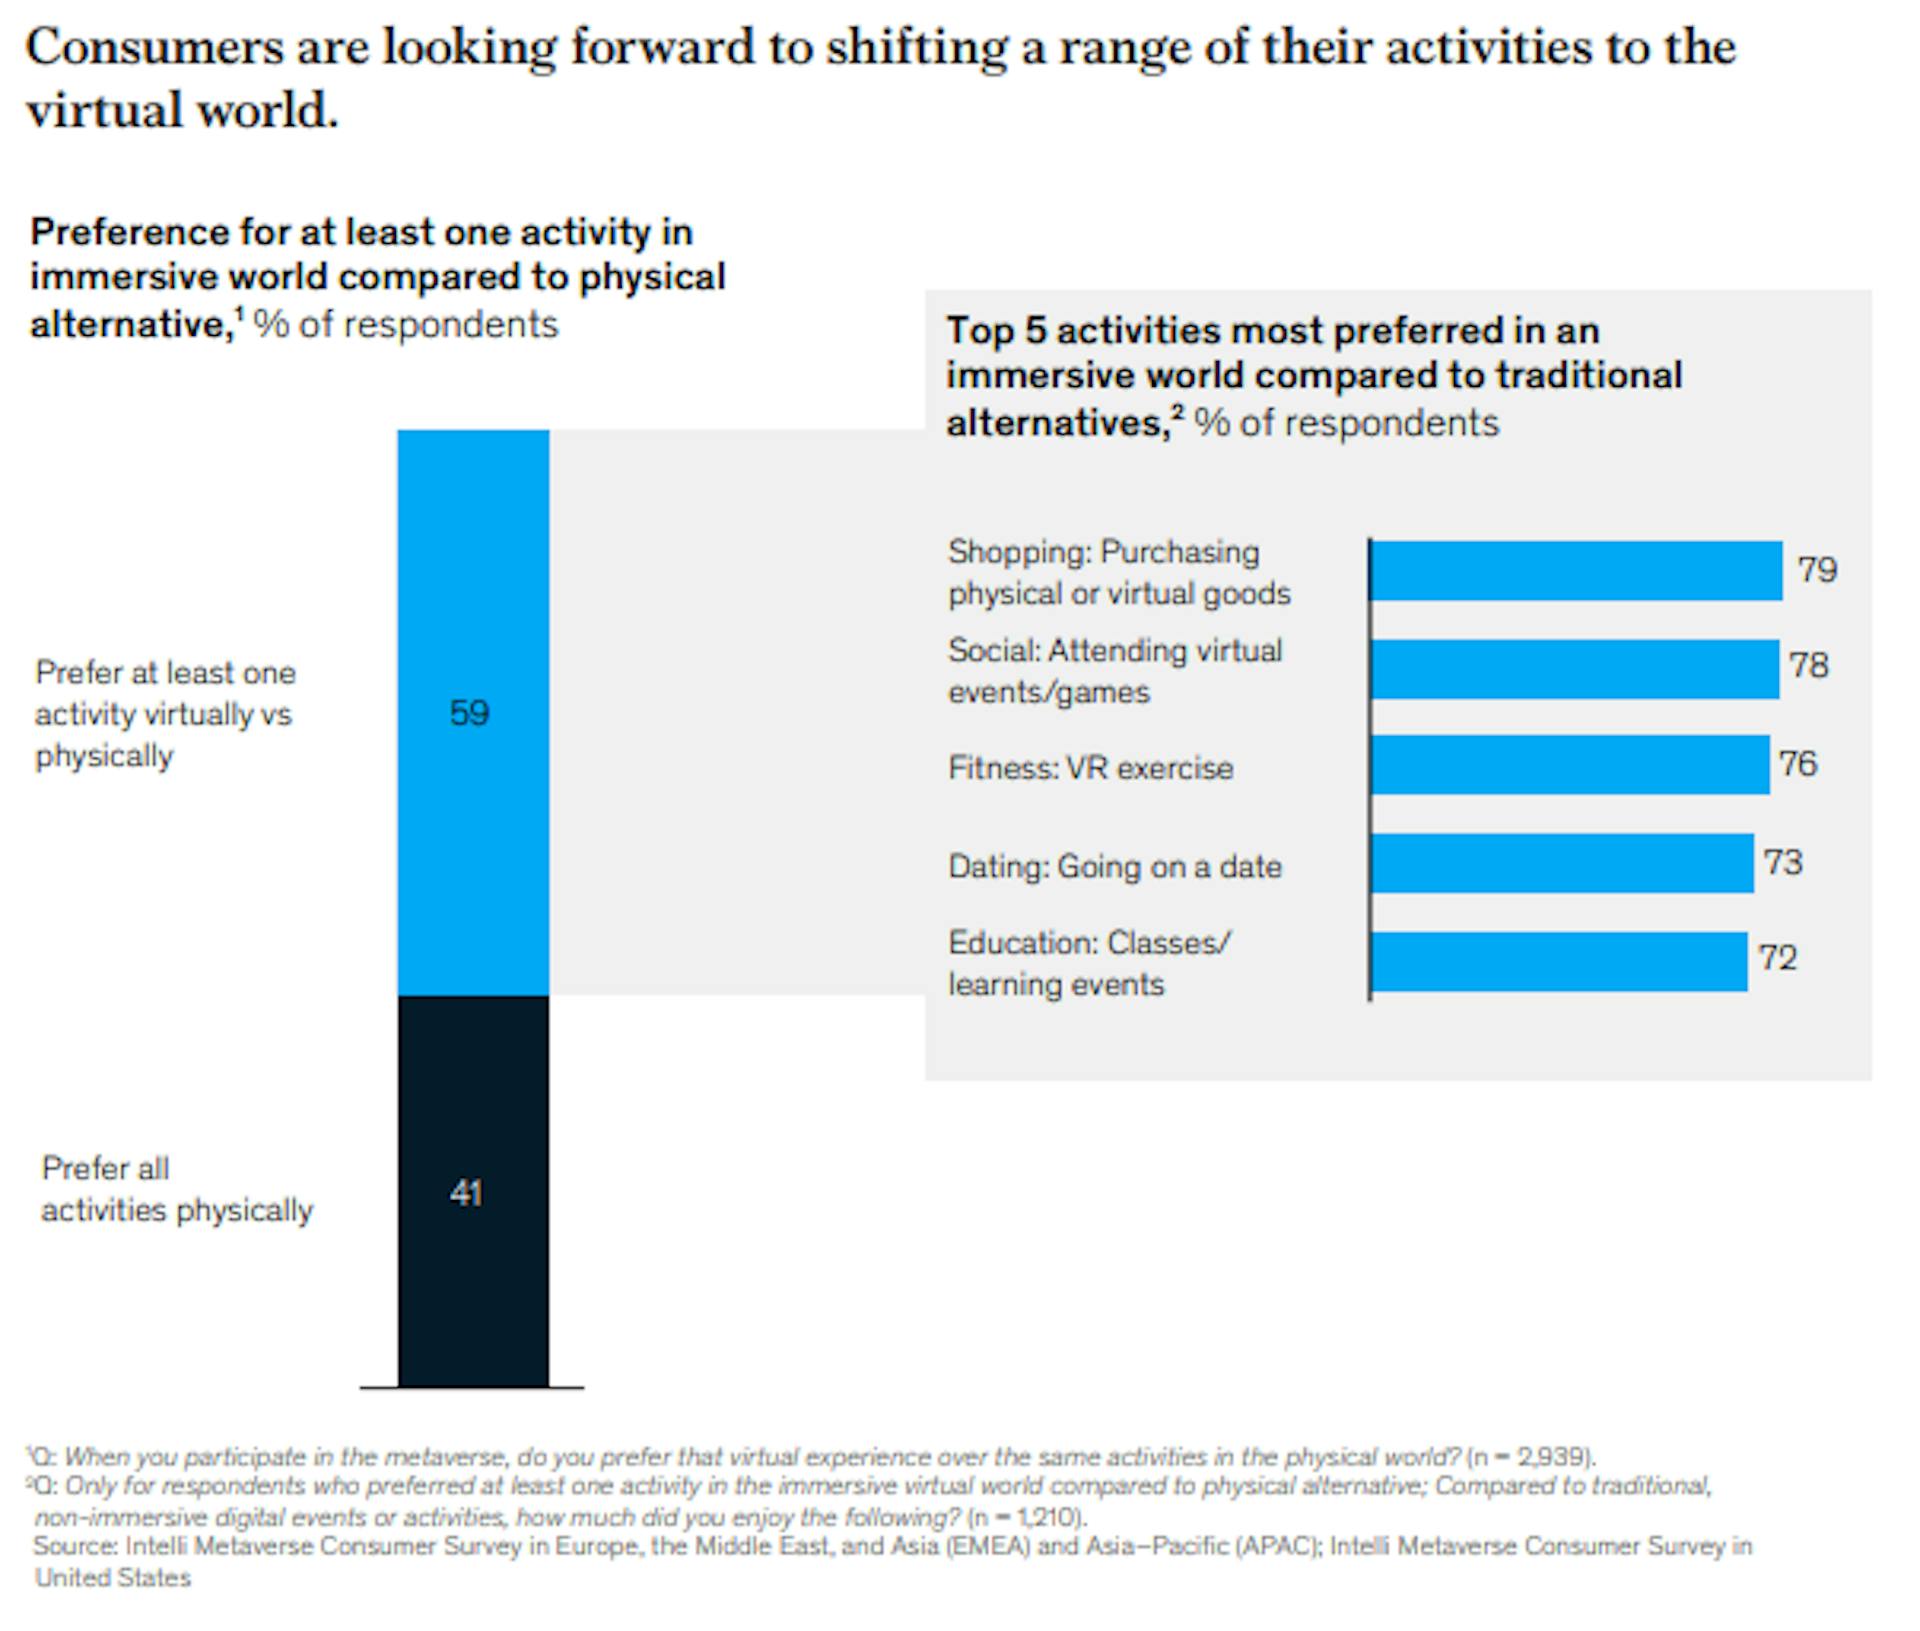 Consumers are looking forward to shifting a range of their activities to the virtual world